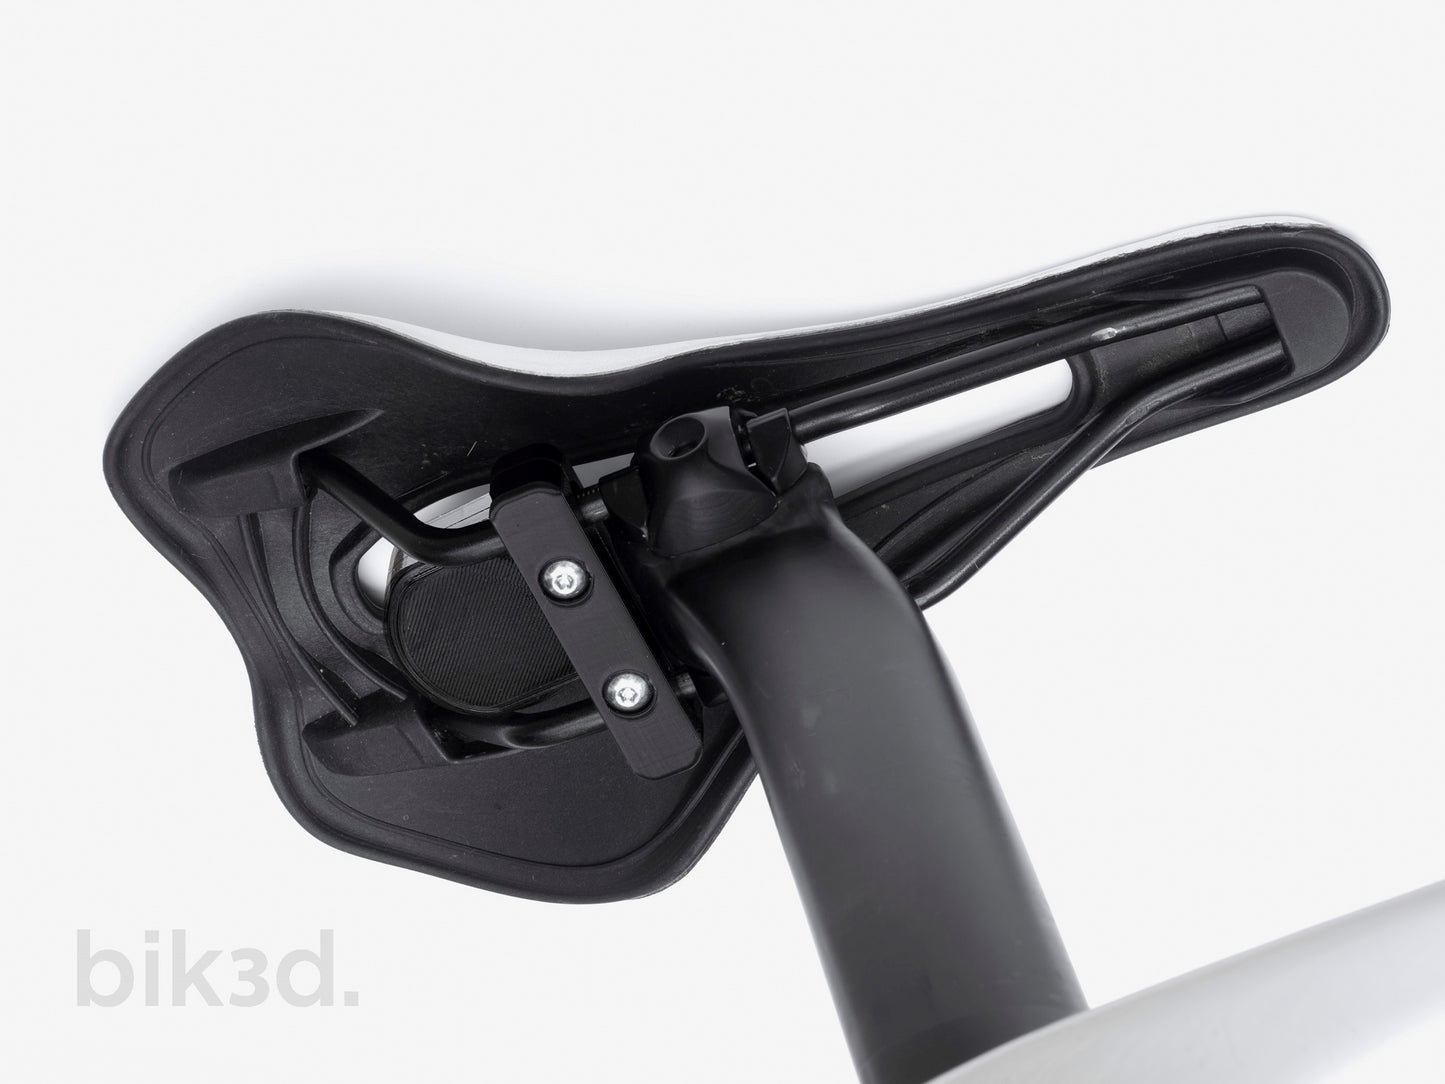 ATUVOS Water Resistant Cycle Under-Saddle Holder©